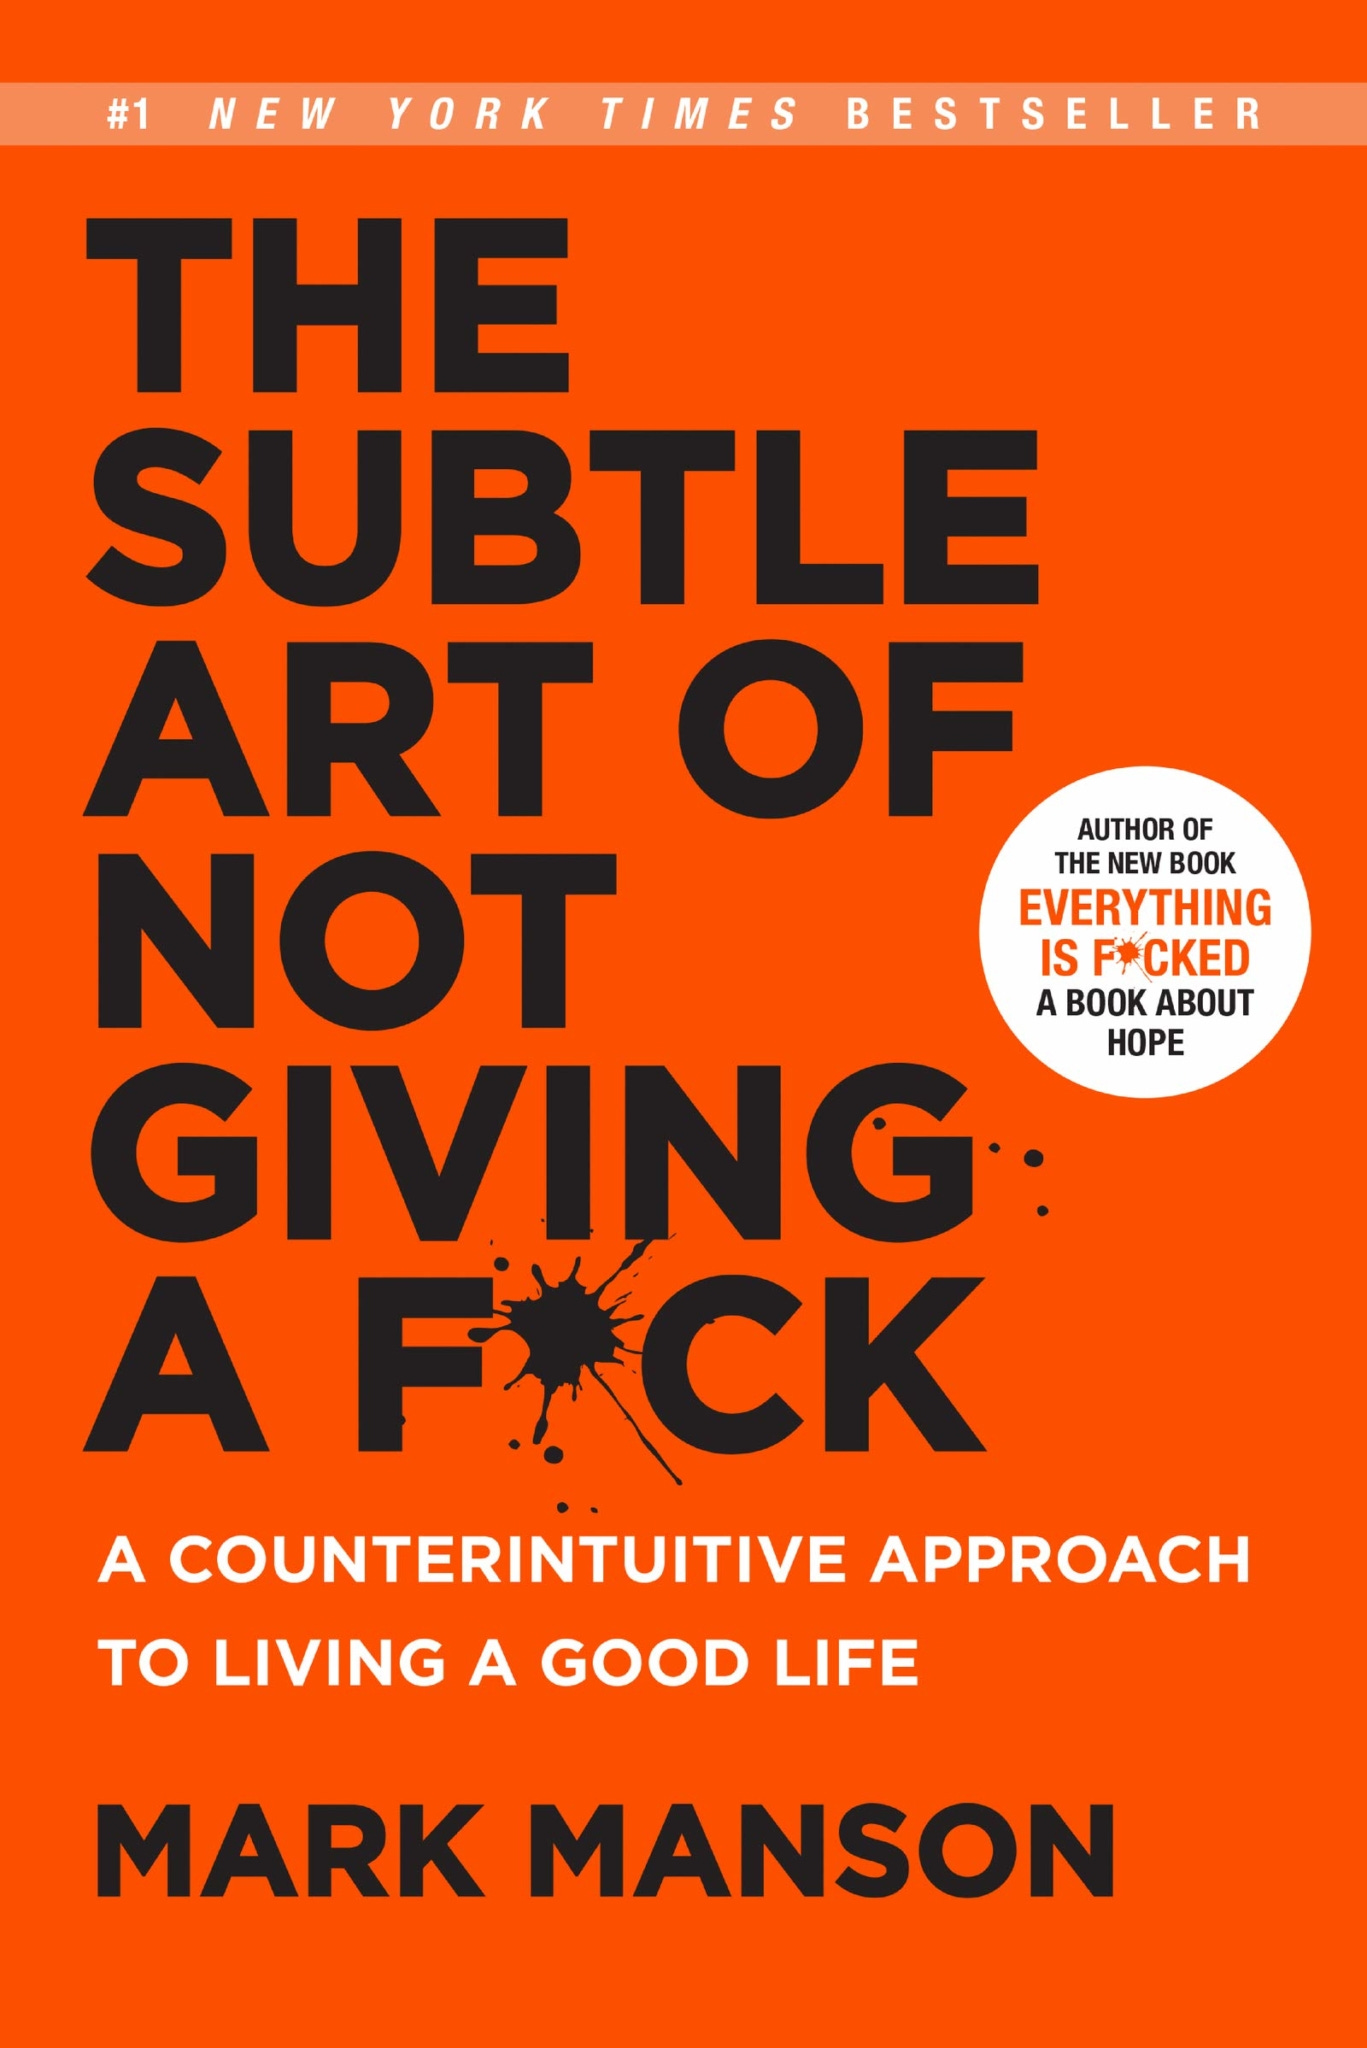 The Subtle Art of Not Giving a F*ck - Mark Manson | Gravitas Investigations